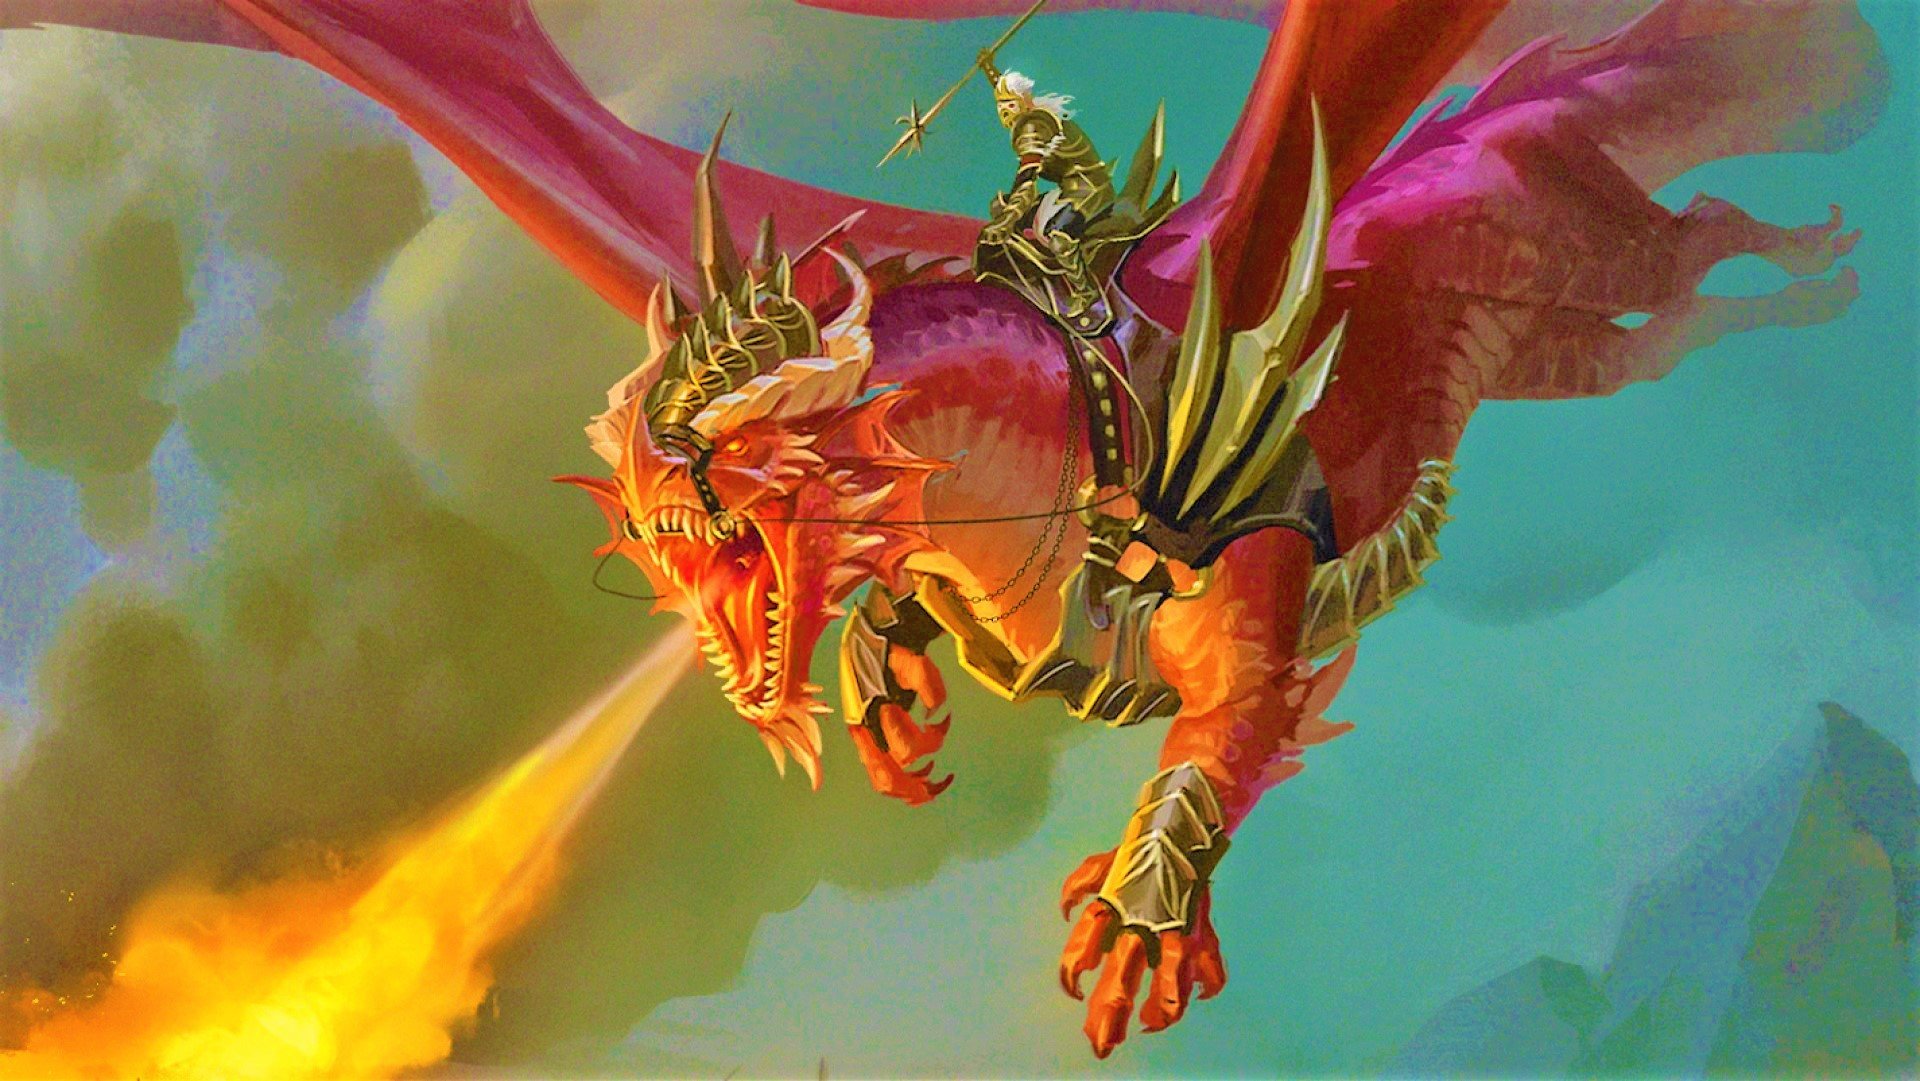 DnD how to be a DM - Wizards of the Coast art of a soldier riding a dragon as it breathes fire